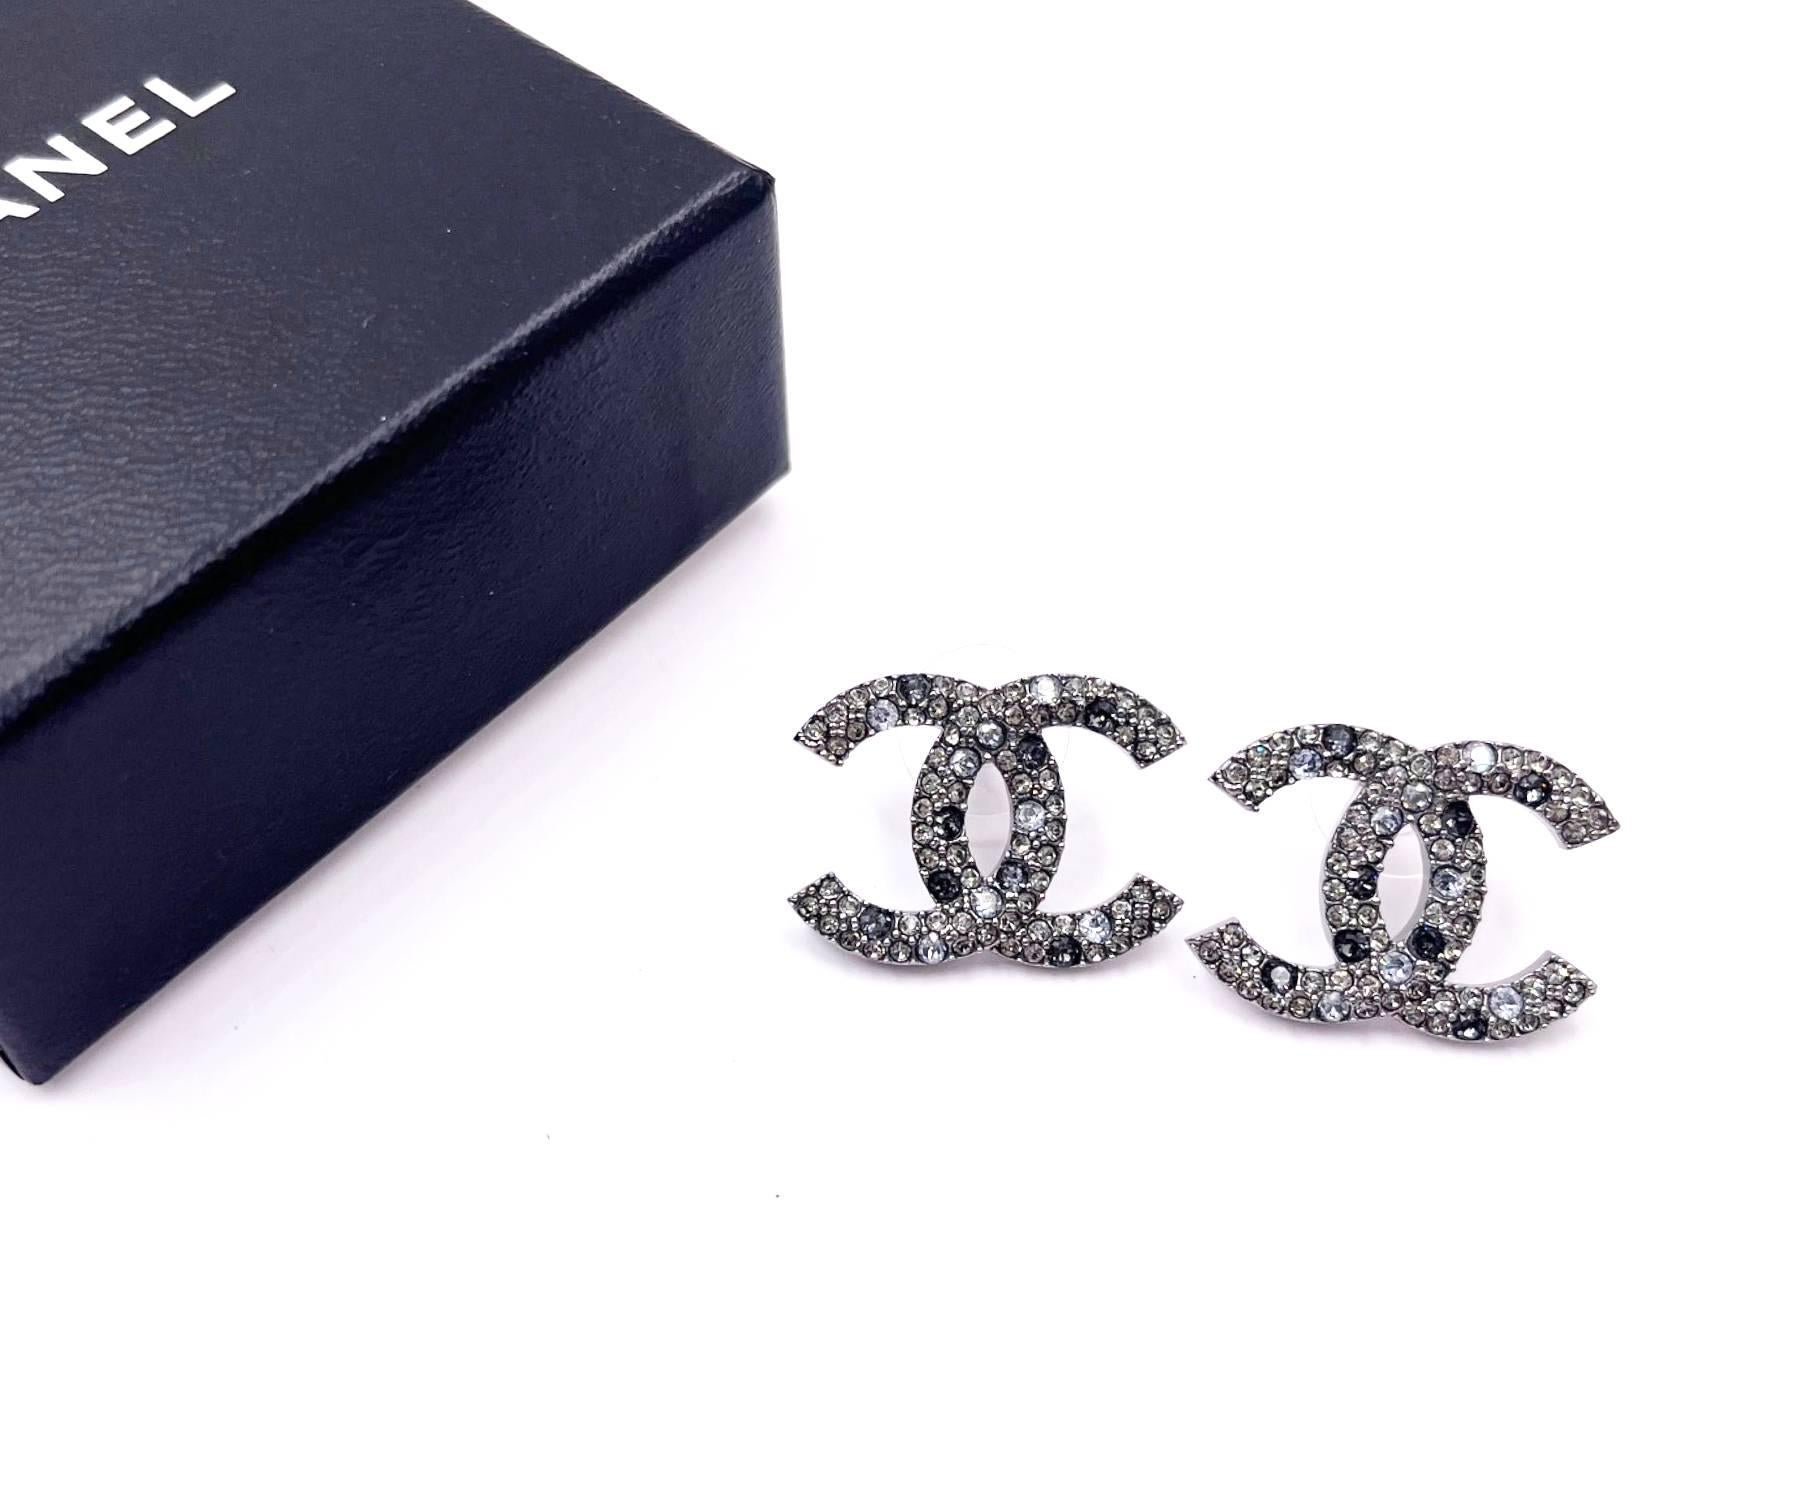 Chanel Grey CC Grey Scattering Crystal Large Piercing Earrings

*Marked 17
*Made in Italy
*Comes with the original box and pouch

-Approximately 0.75